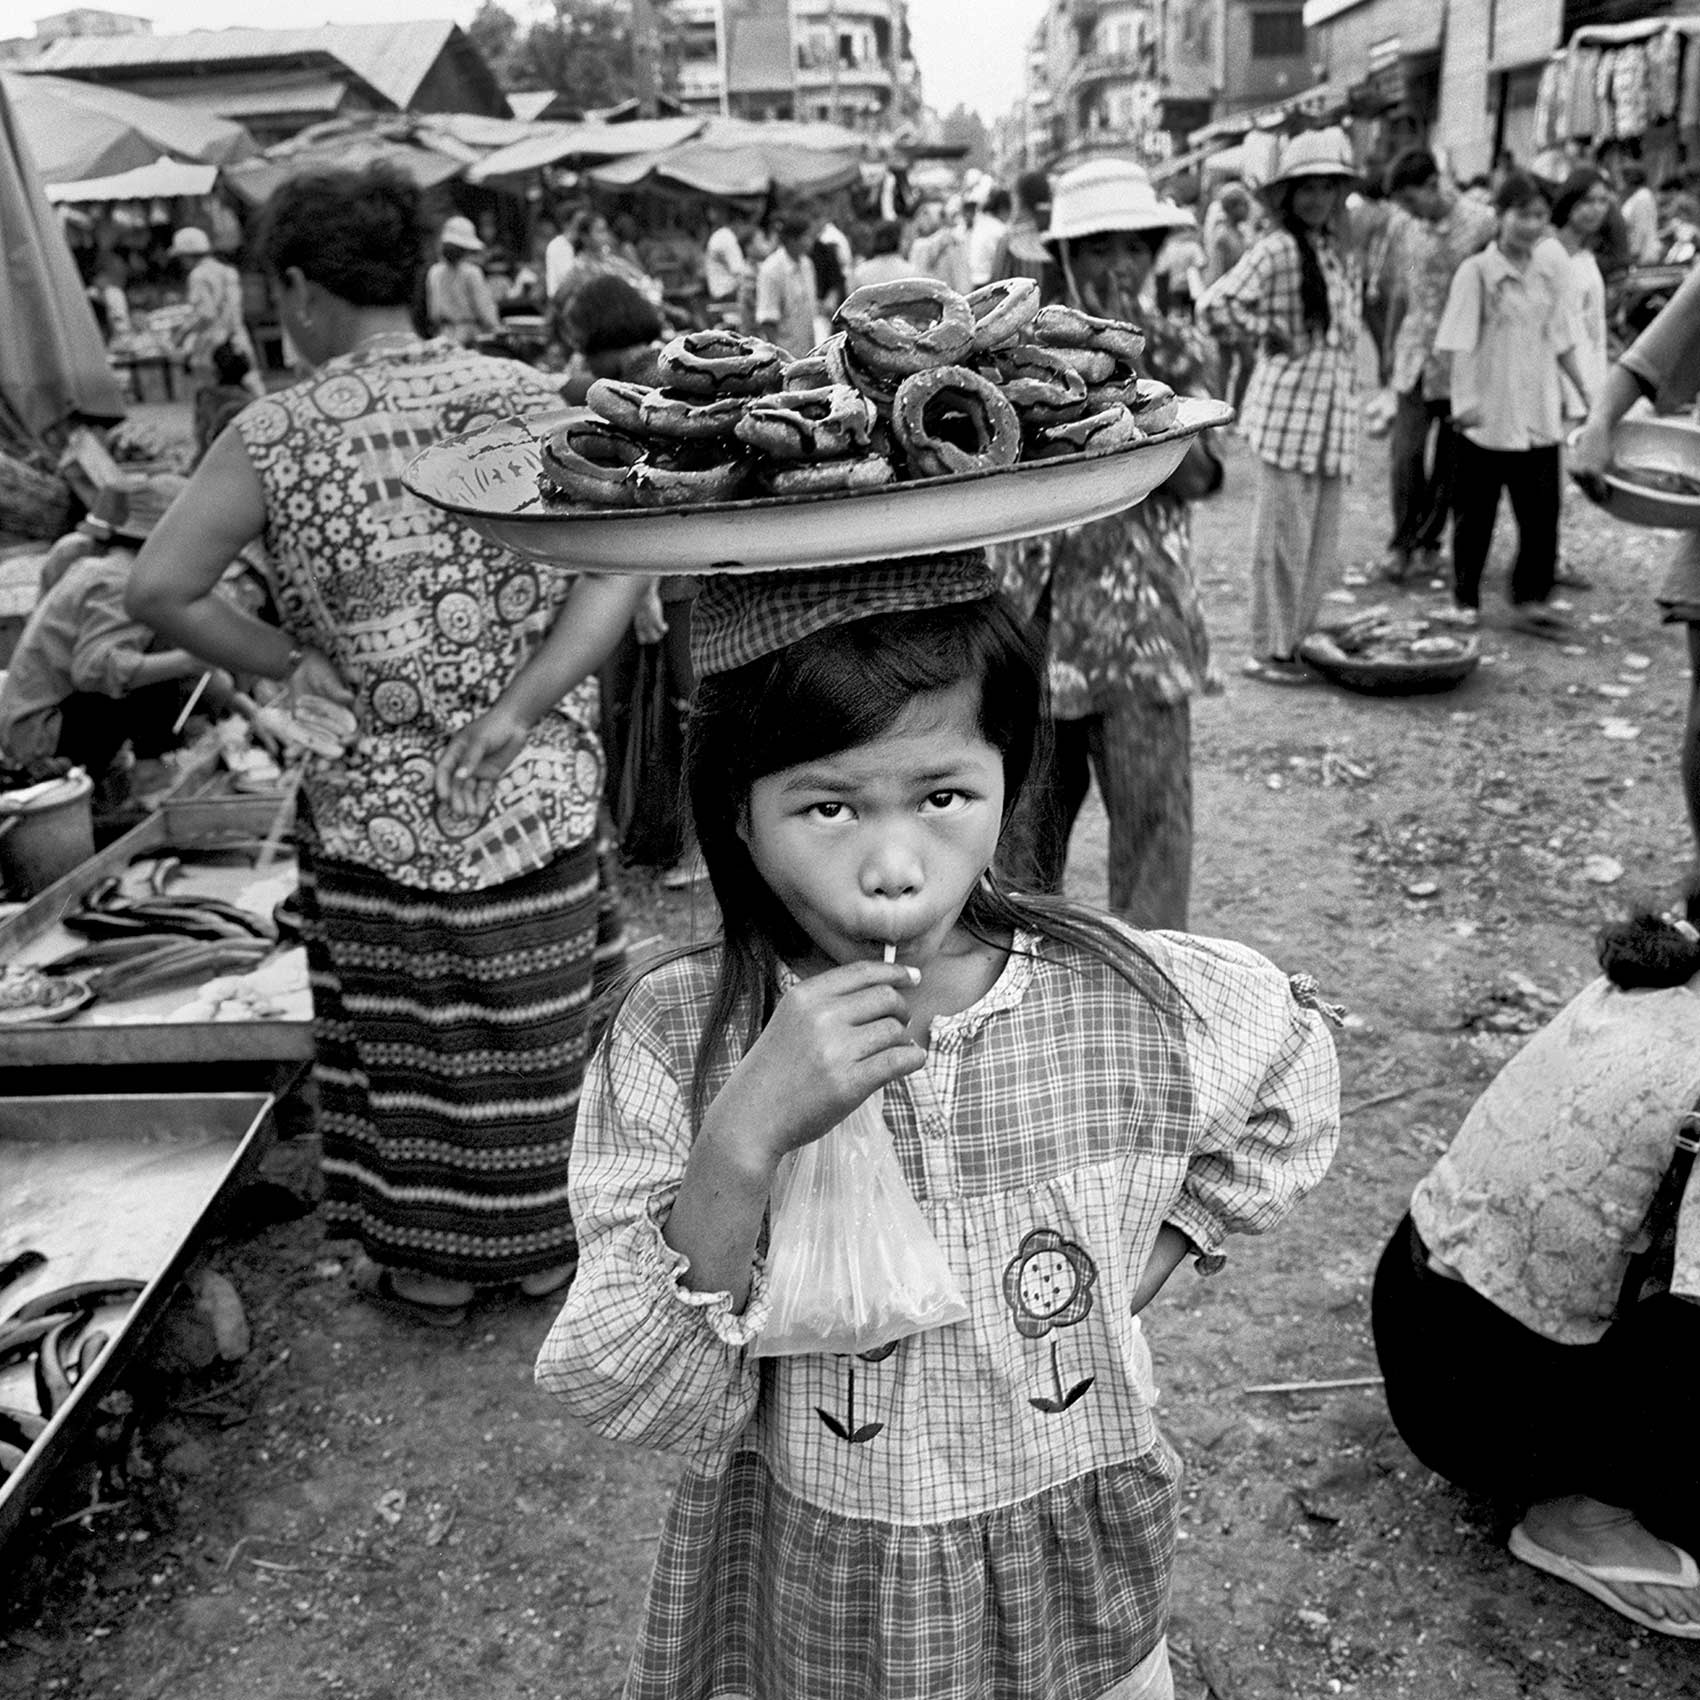 a-young-girl-in-an-angkor-wat-market-tries-to-sell-donuts-balanced-in-a-tray-on-her-head